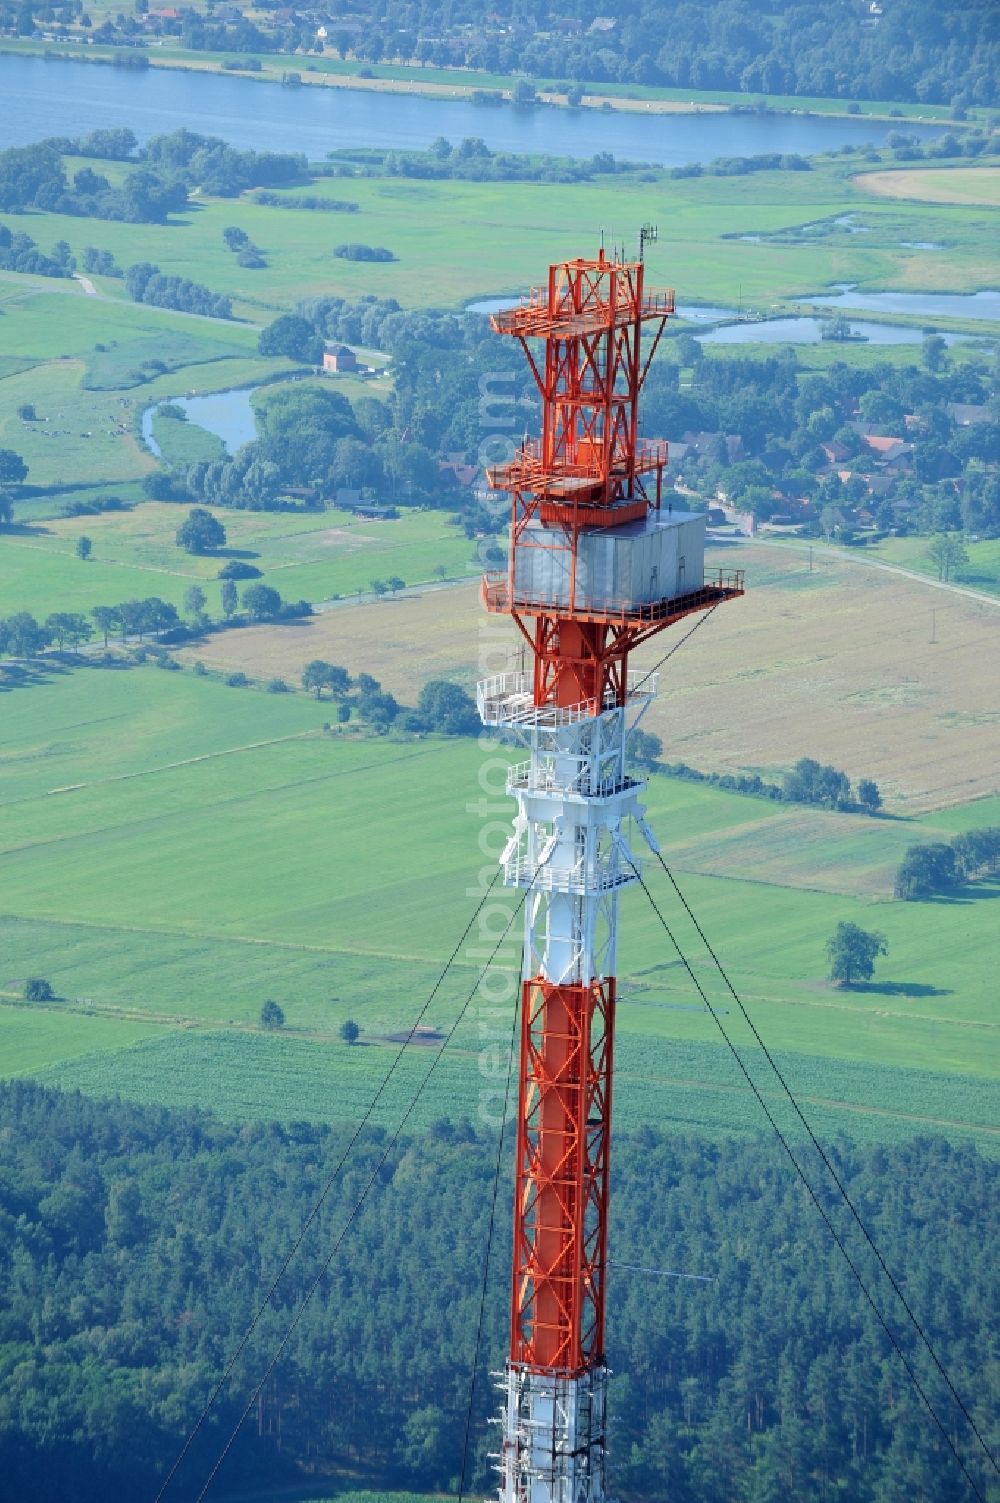 Dannenberg from the bird's eye view: The radio tower at Höhbeck Dannenberg in Lower Saxony